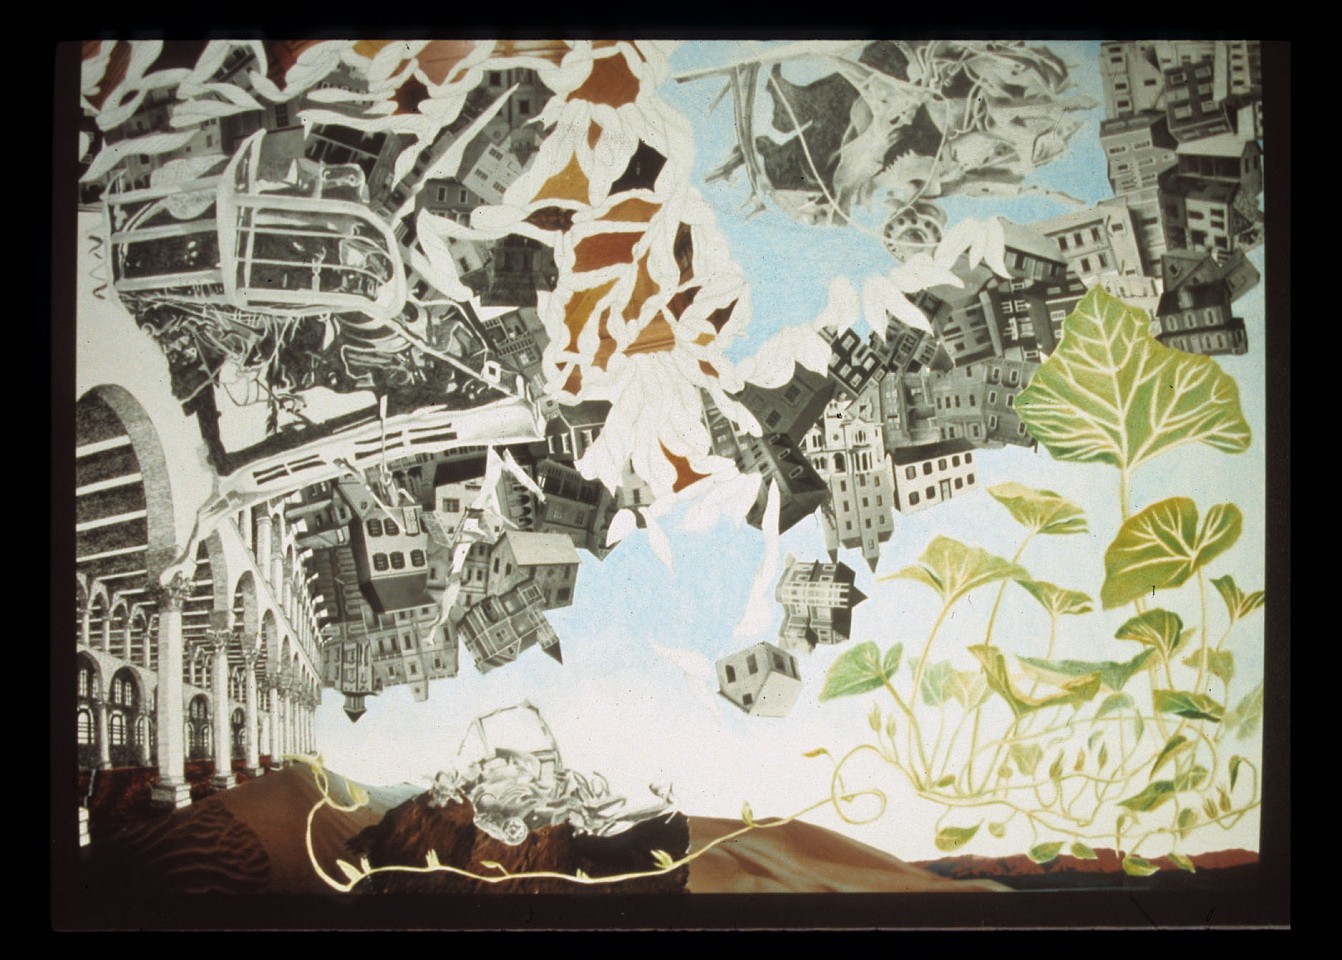 Jonathan Allen
Falluja Dollhouse, 2006
paint, paper, pencil and ink on paper, 22 x 30 in.